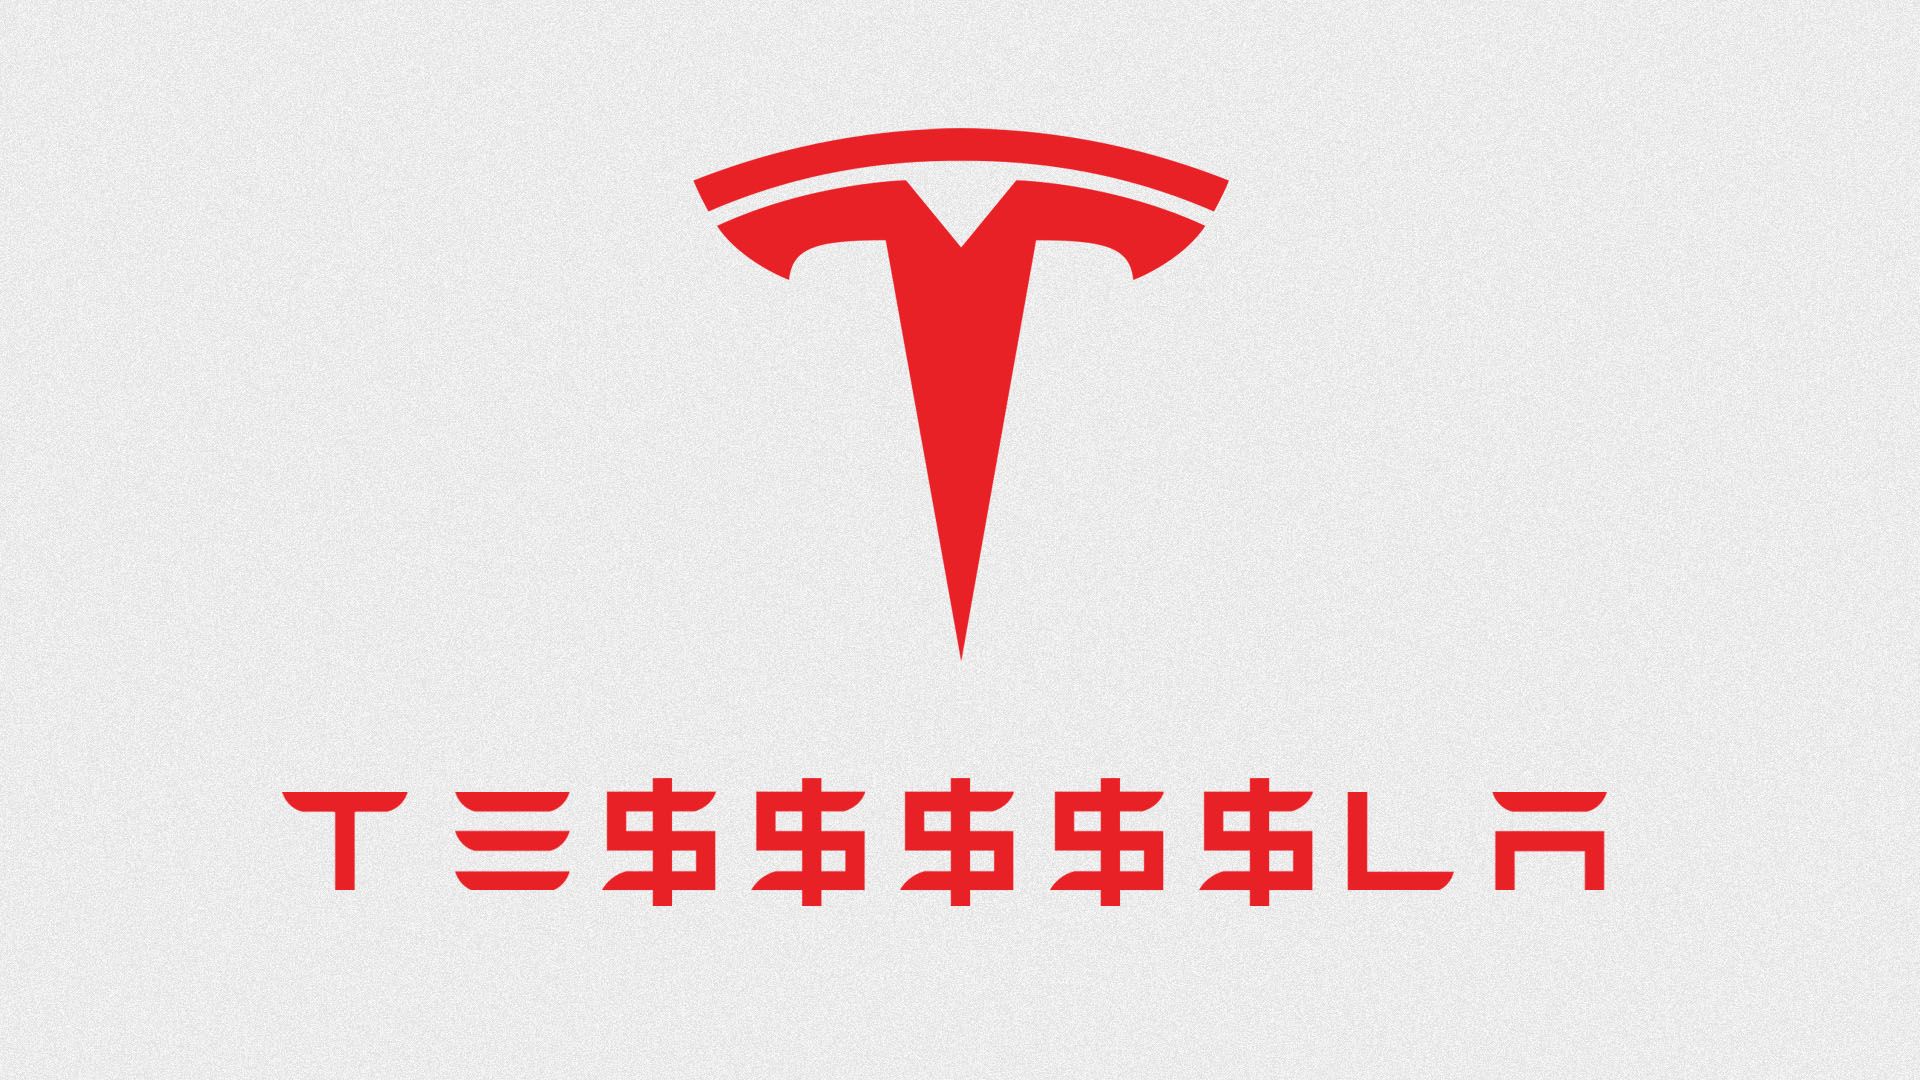 Illustration of the Tesla logo with multiple dollar signs in the middle